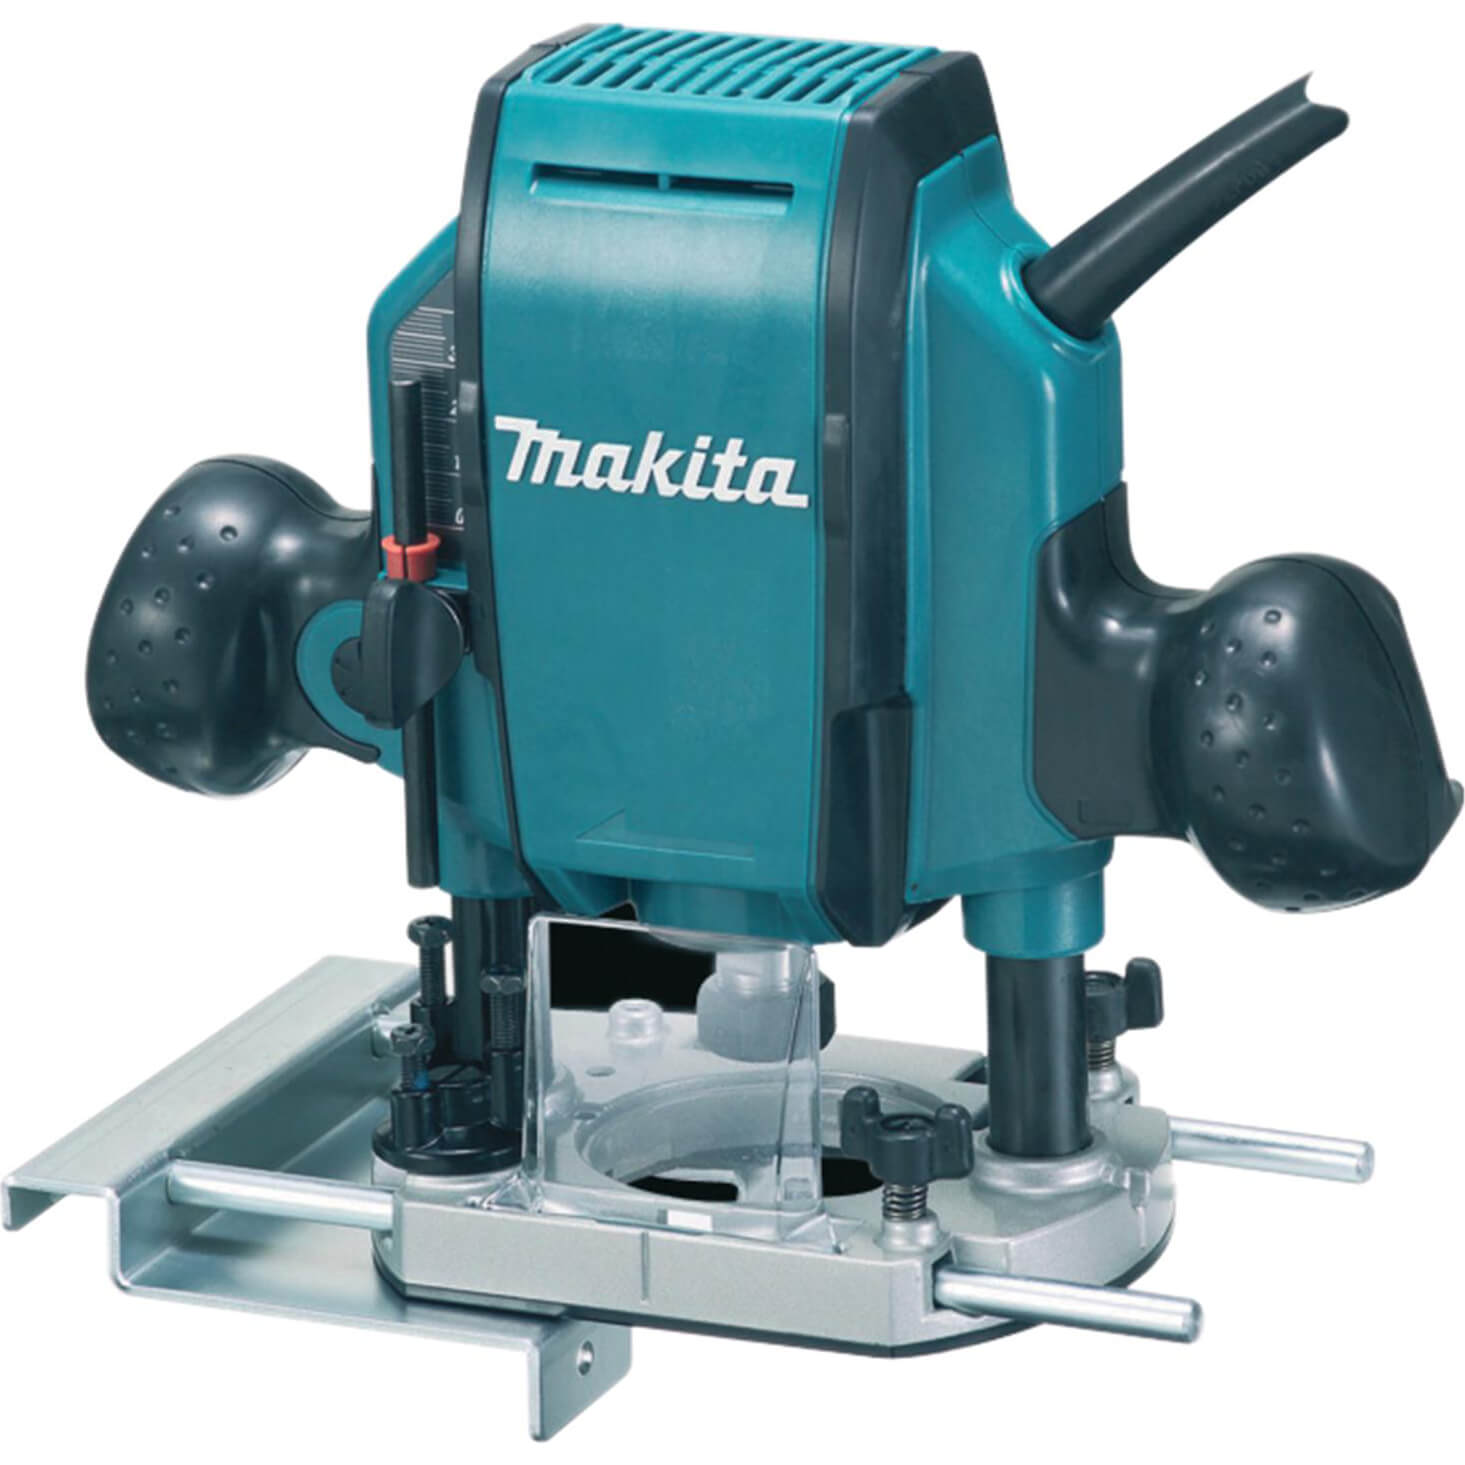 Image of Makita RP0900X 1/4" or 3/8" Plunge Router 110v